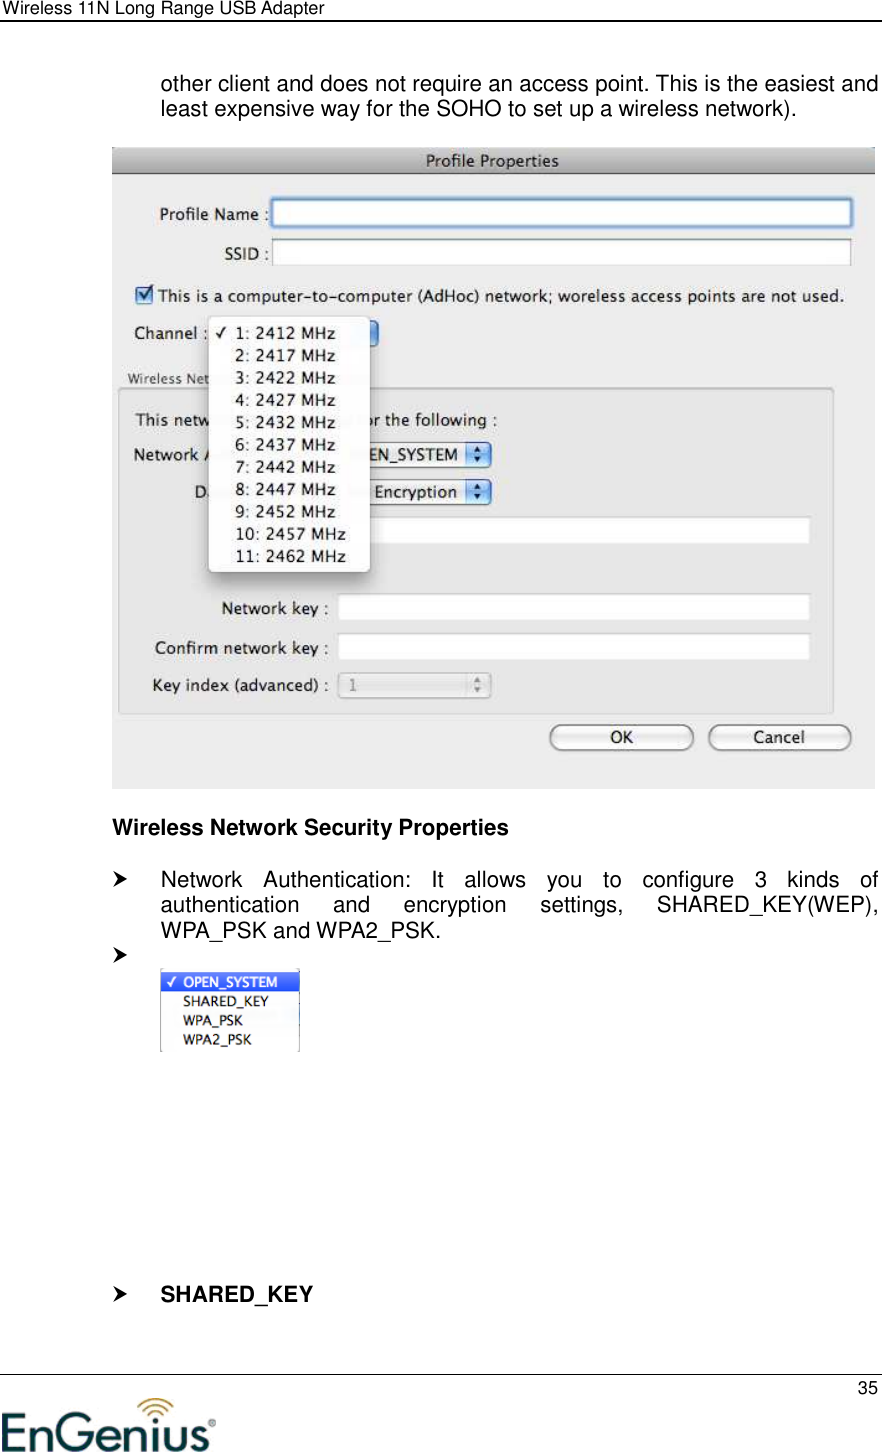 Wireless 11N Long Range USB Adapter  35  other client and does not require an access point. This is the easiest and least expensive way for the SOHO to set up a wireless network).    Wireless Network Security Properties    Network  Authentication:  It  allows  you  to  configure  3  kinds  of authentication  and  encryption  settings,  SHARED_KEY(WEP), WPA_PSK and WPA2_PSK.               SHARED_KEY  